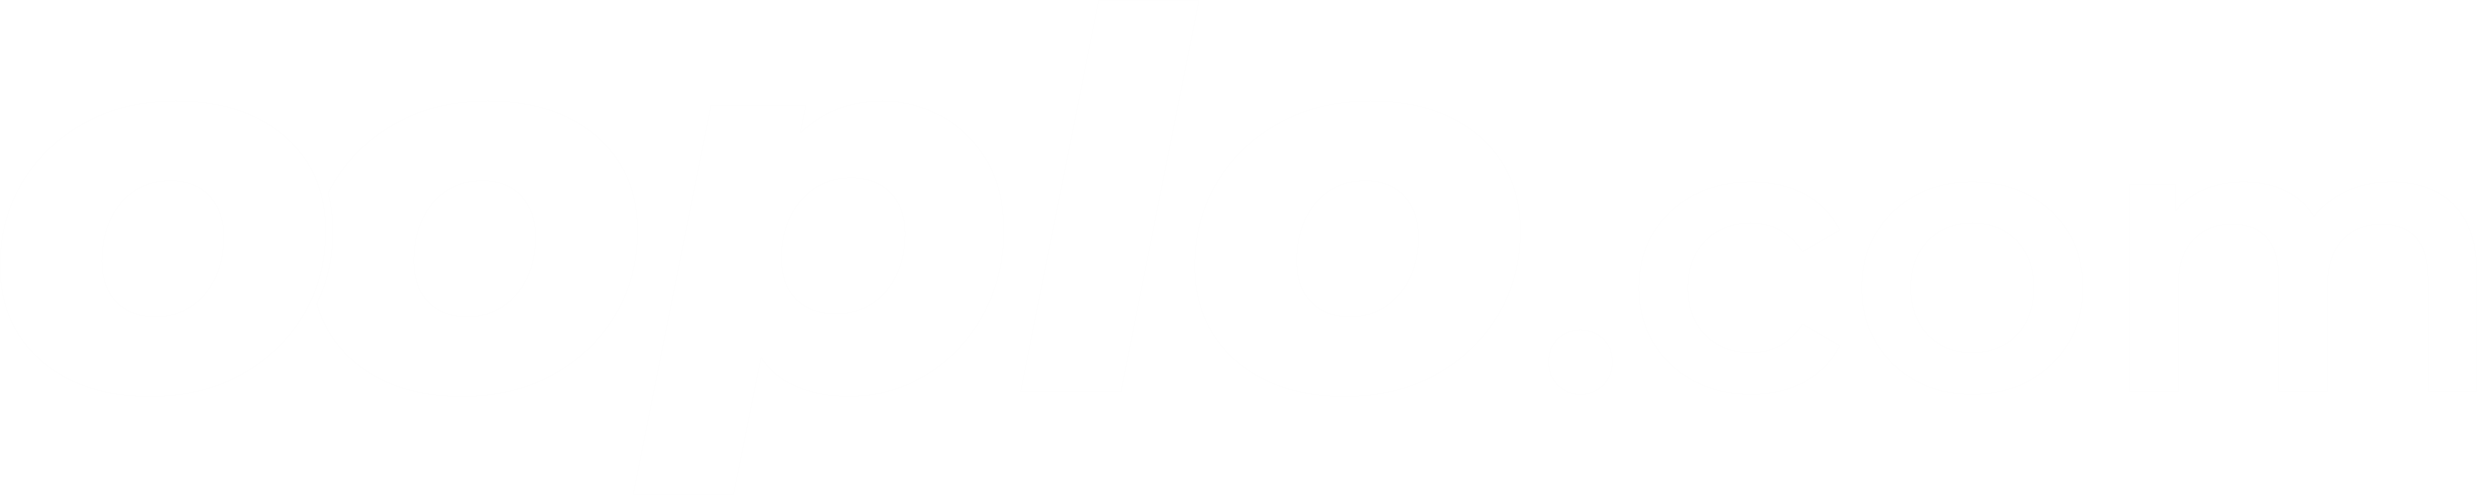 ooplo.com - Earn With Every,  Video Movies, and Shorts Share